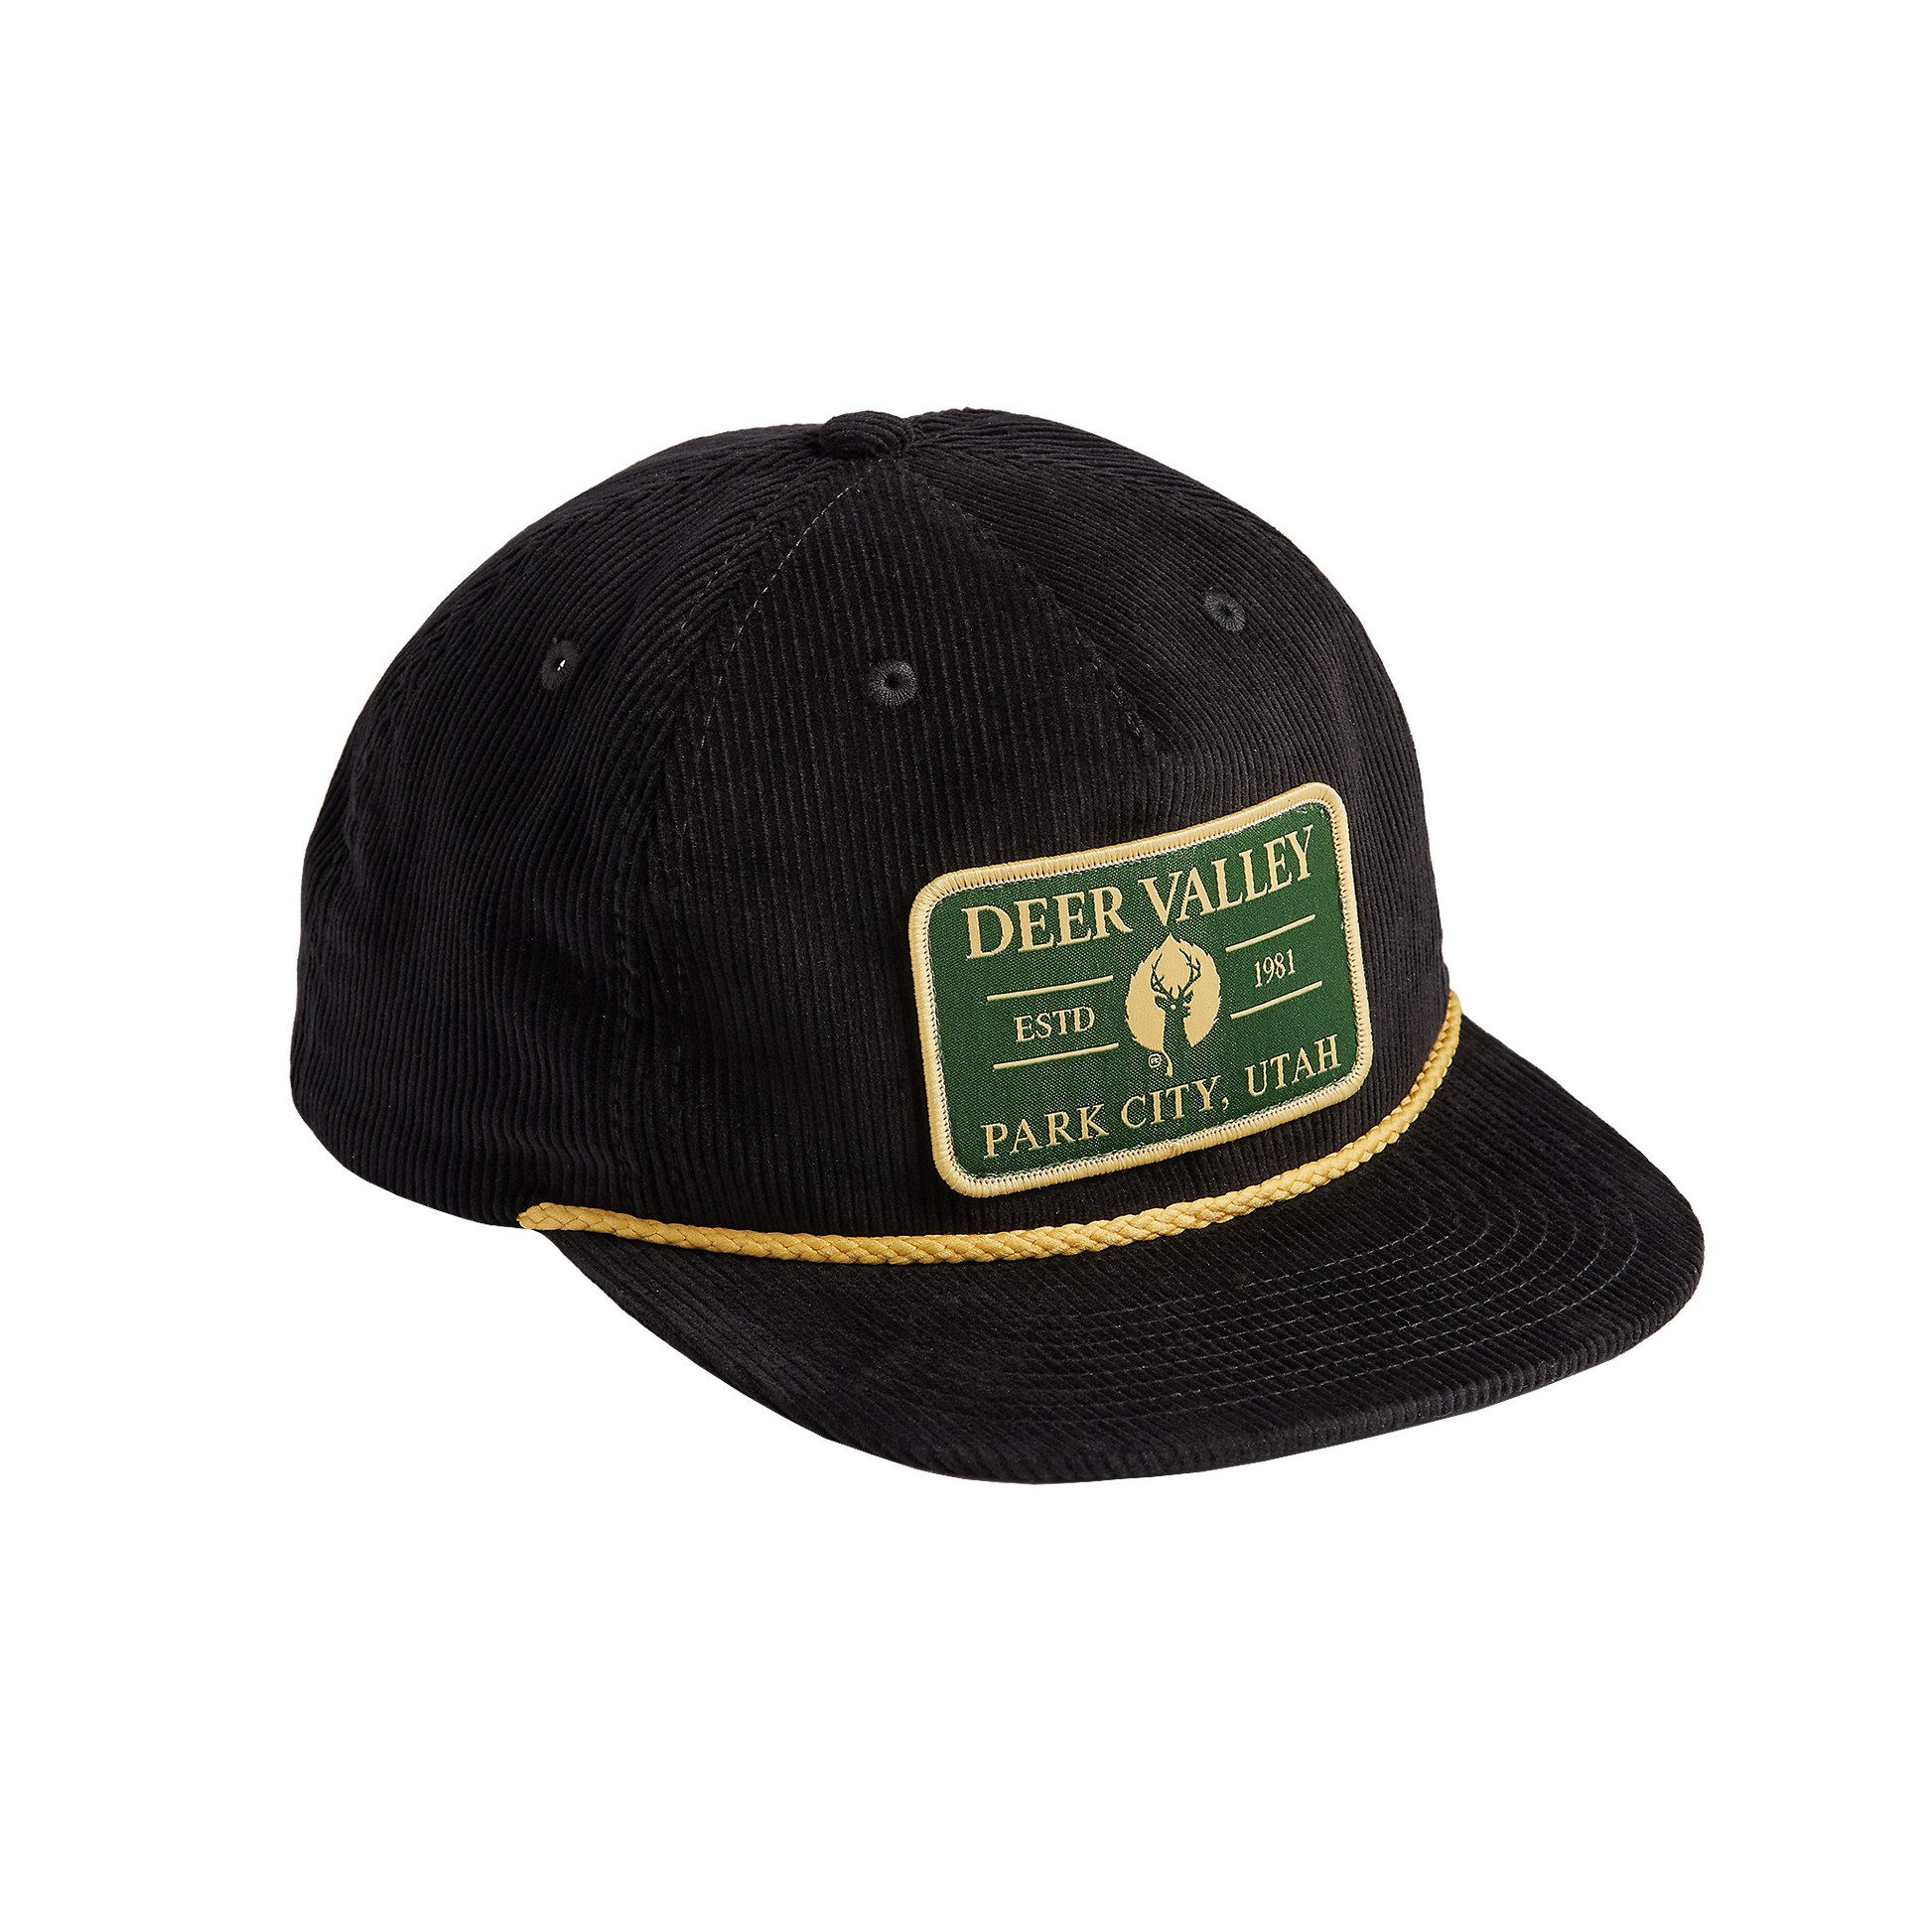 Side view of black corduroy cap with golden rope across brim and adjustable snapback